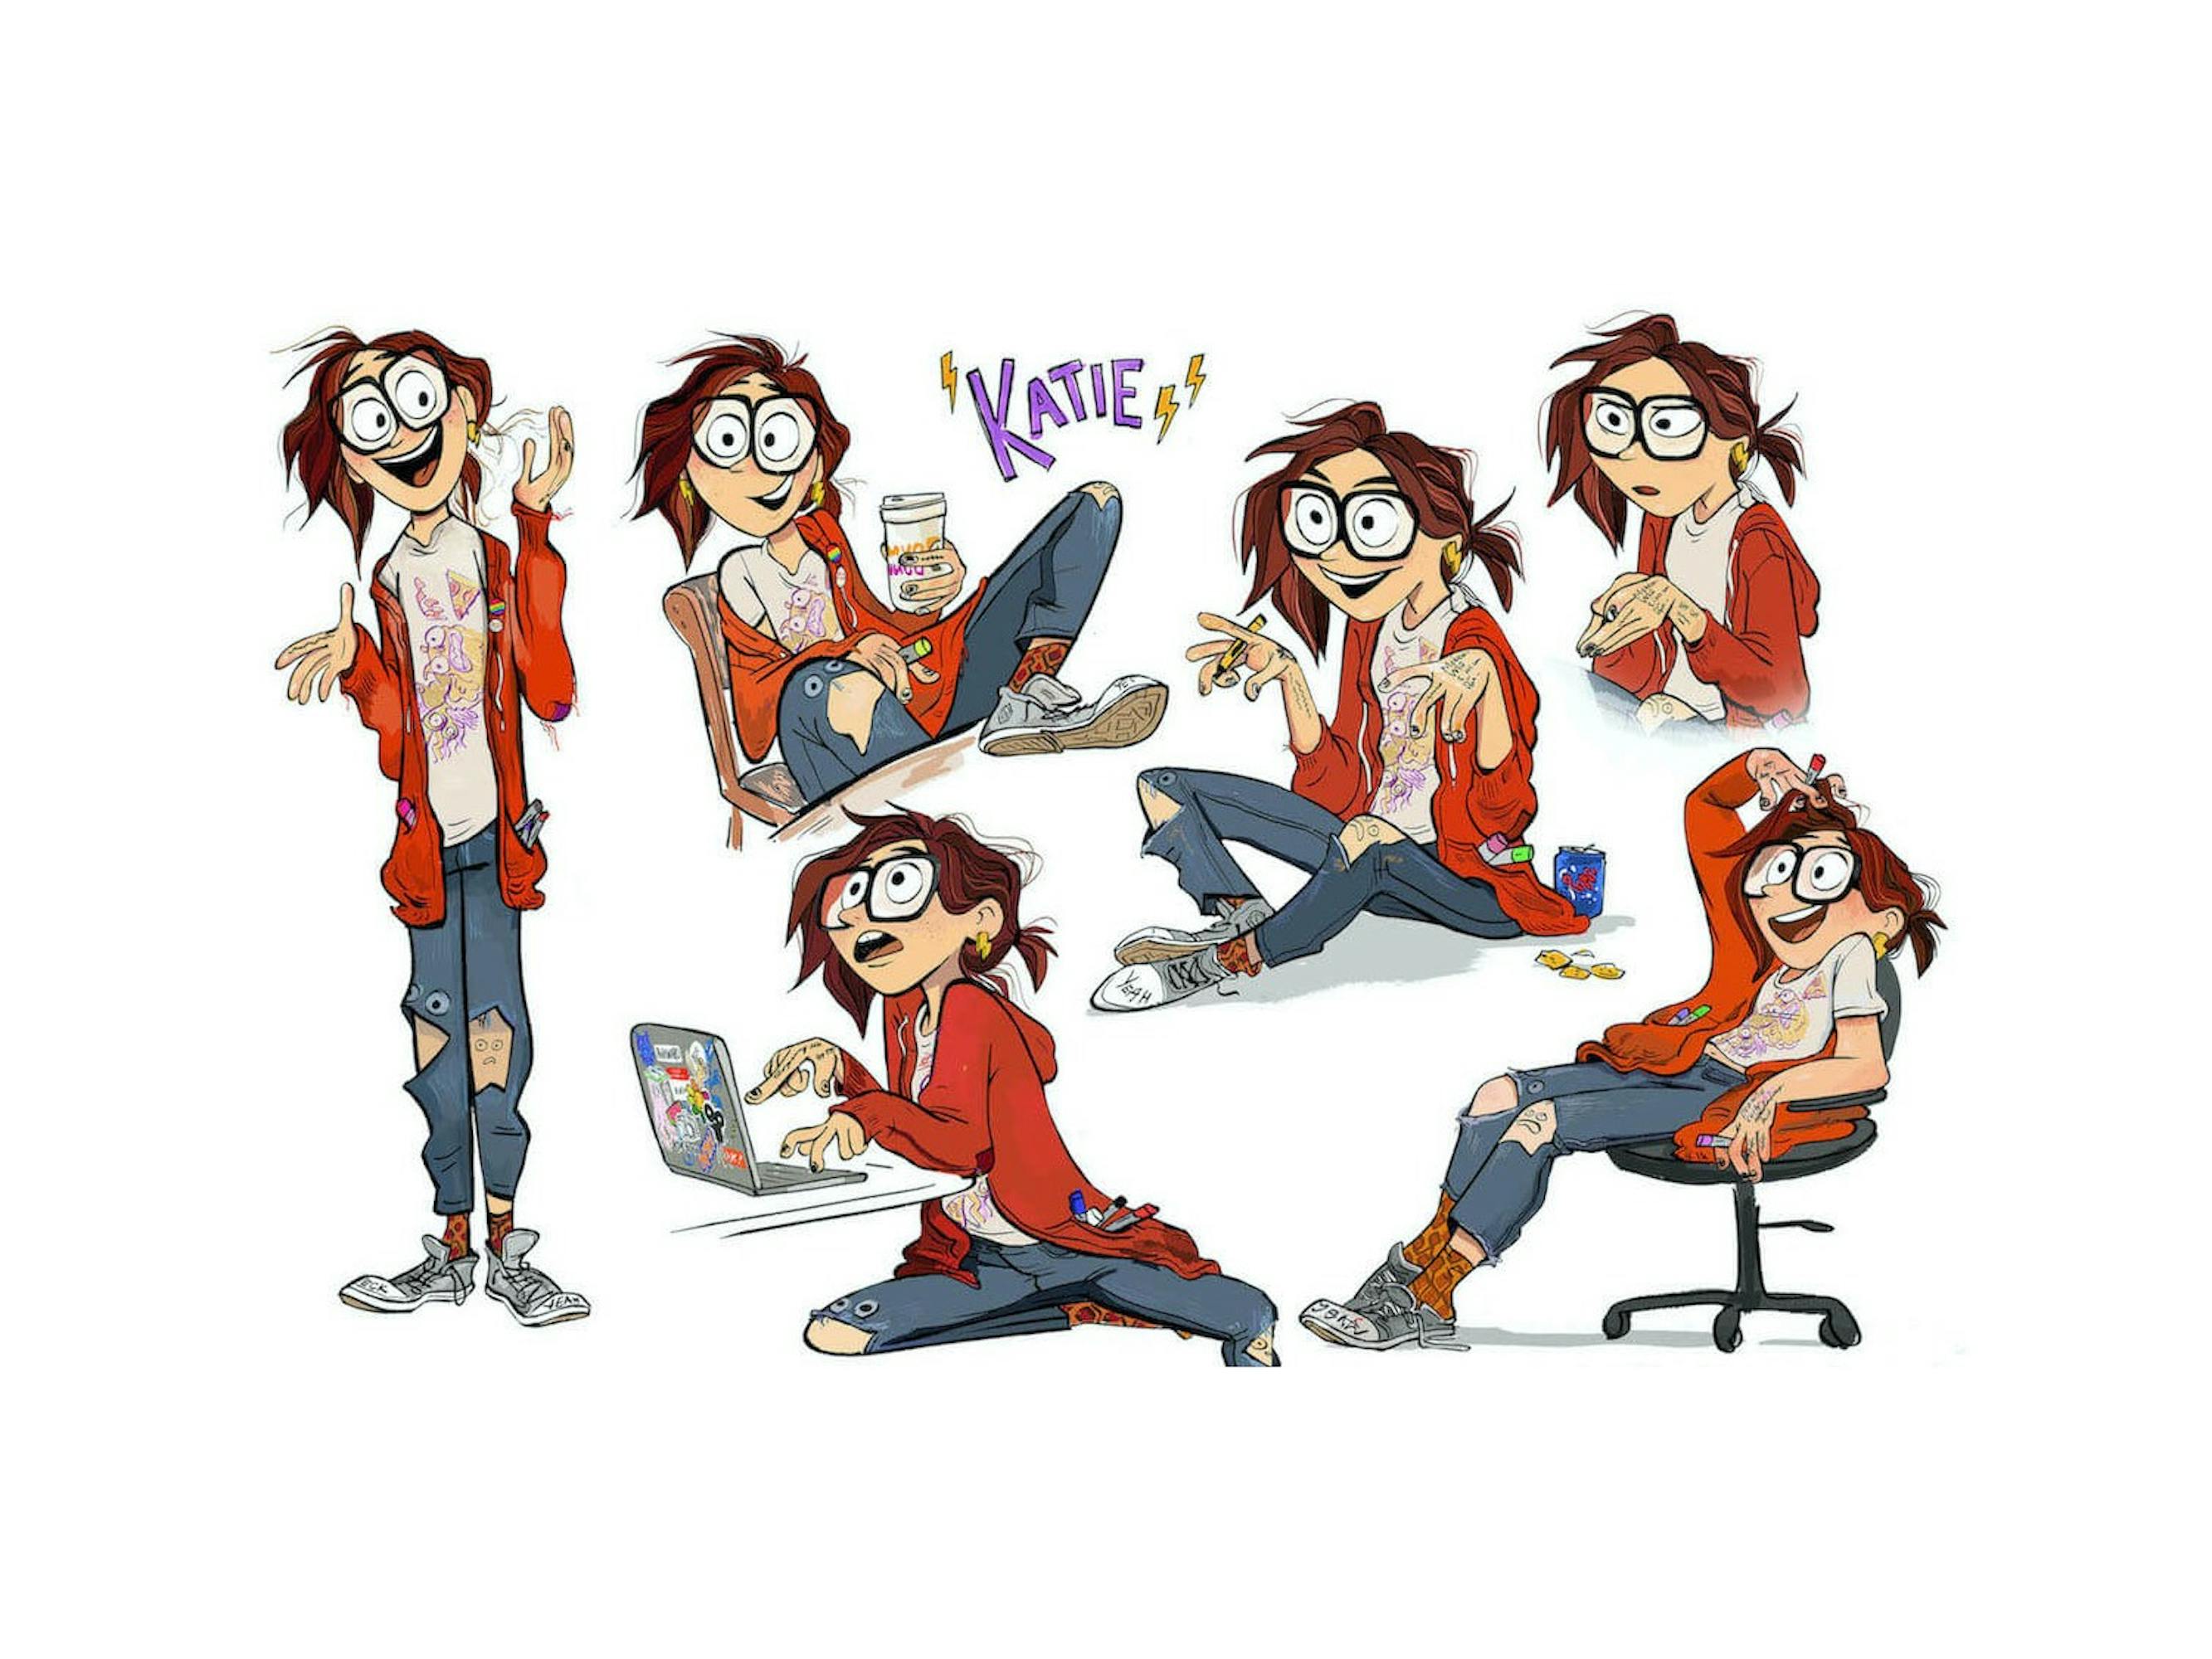 Six images of Katie striking different poses. She wears a comfortable looking hoodie, ripped jeans, floppy shoes, and a grey t-shirt. Her eyes are magnified by circular glasses.